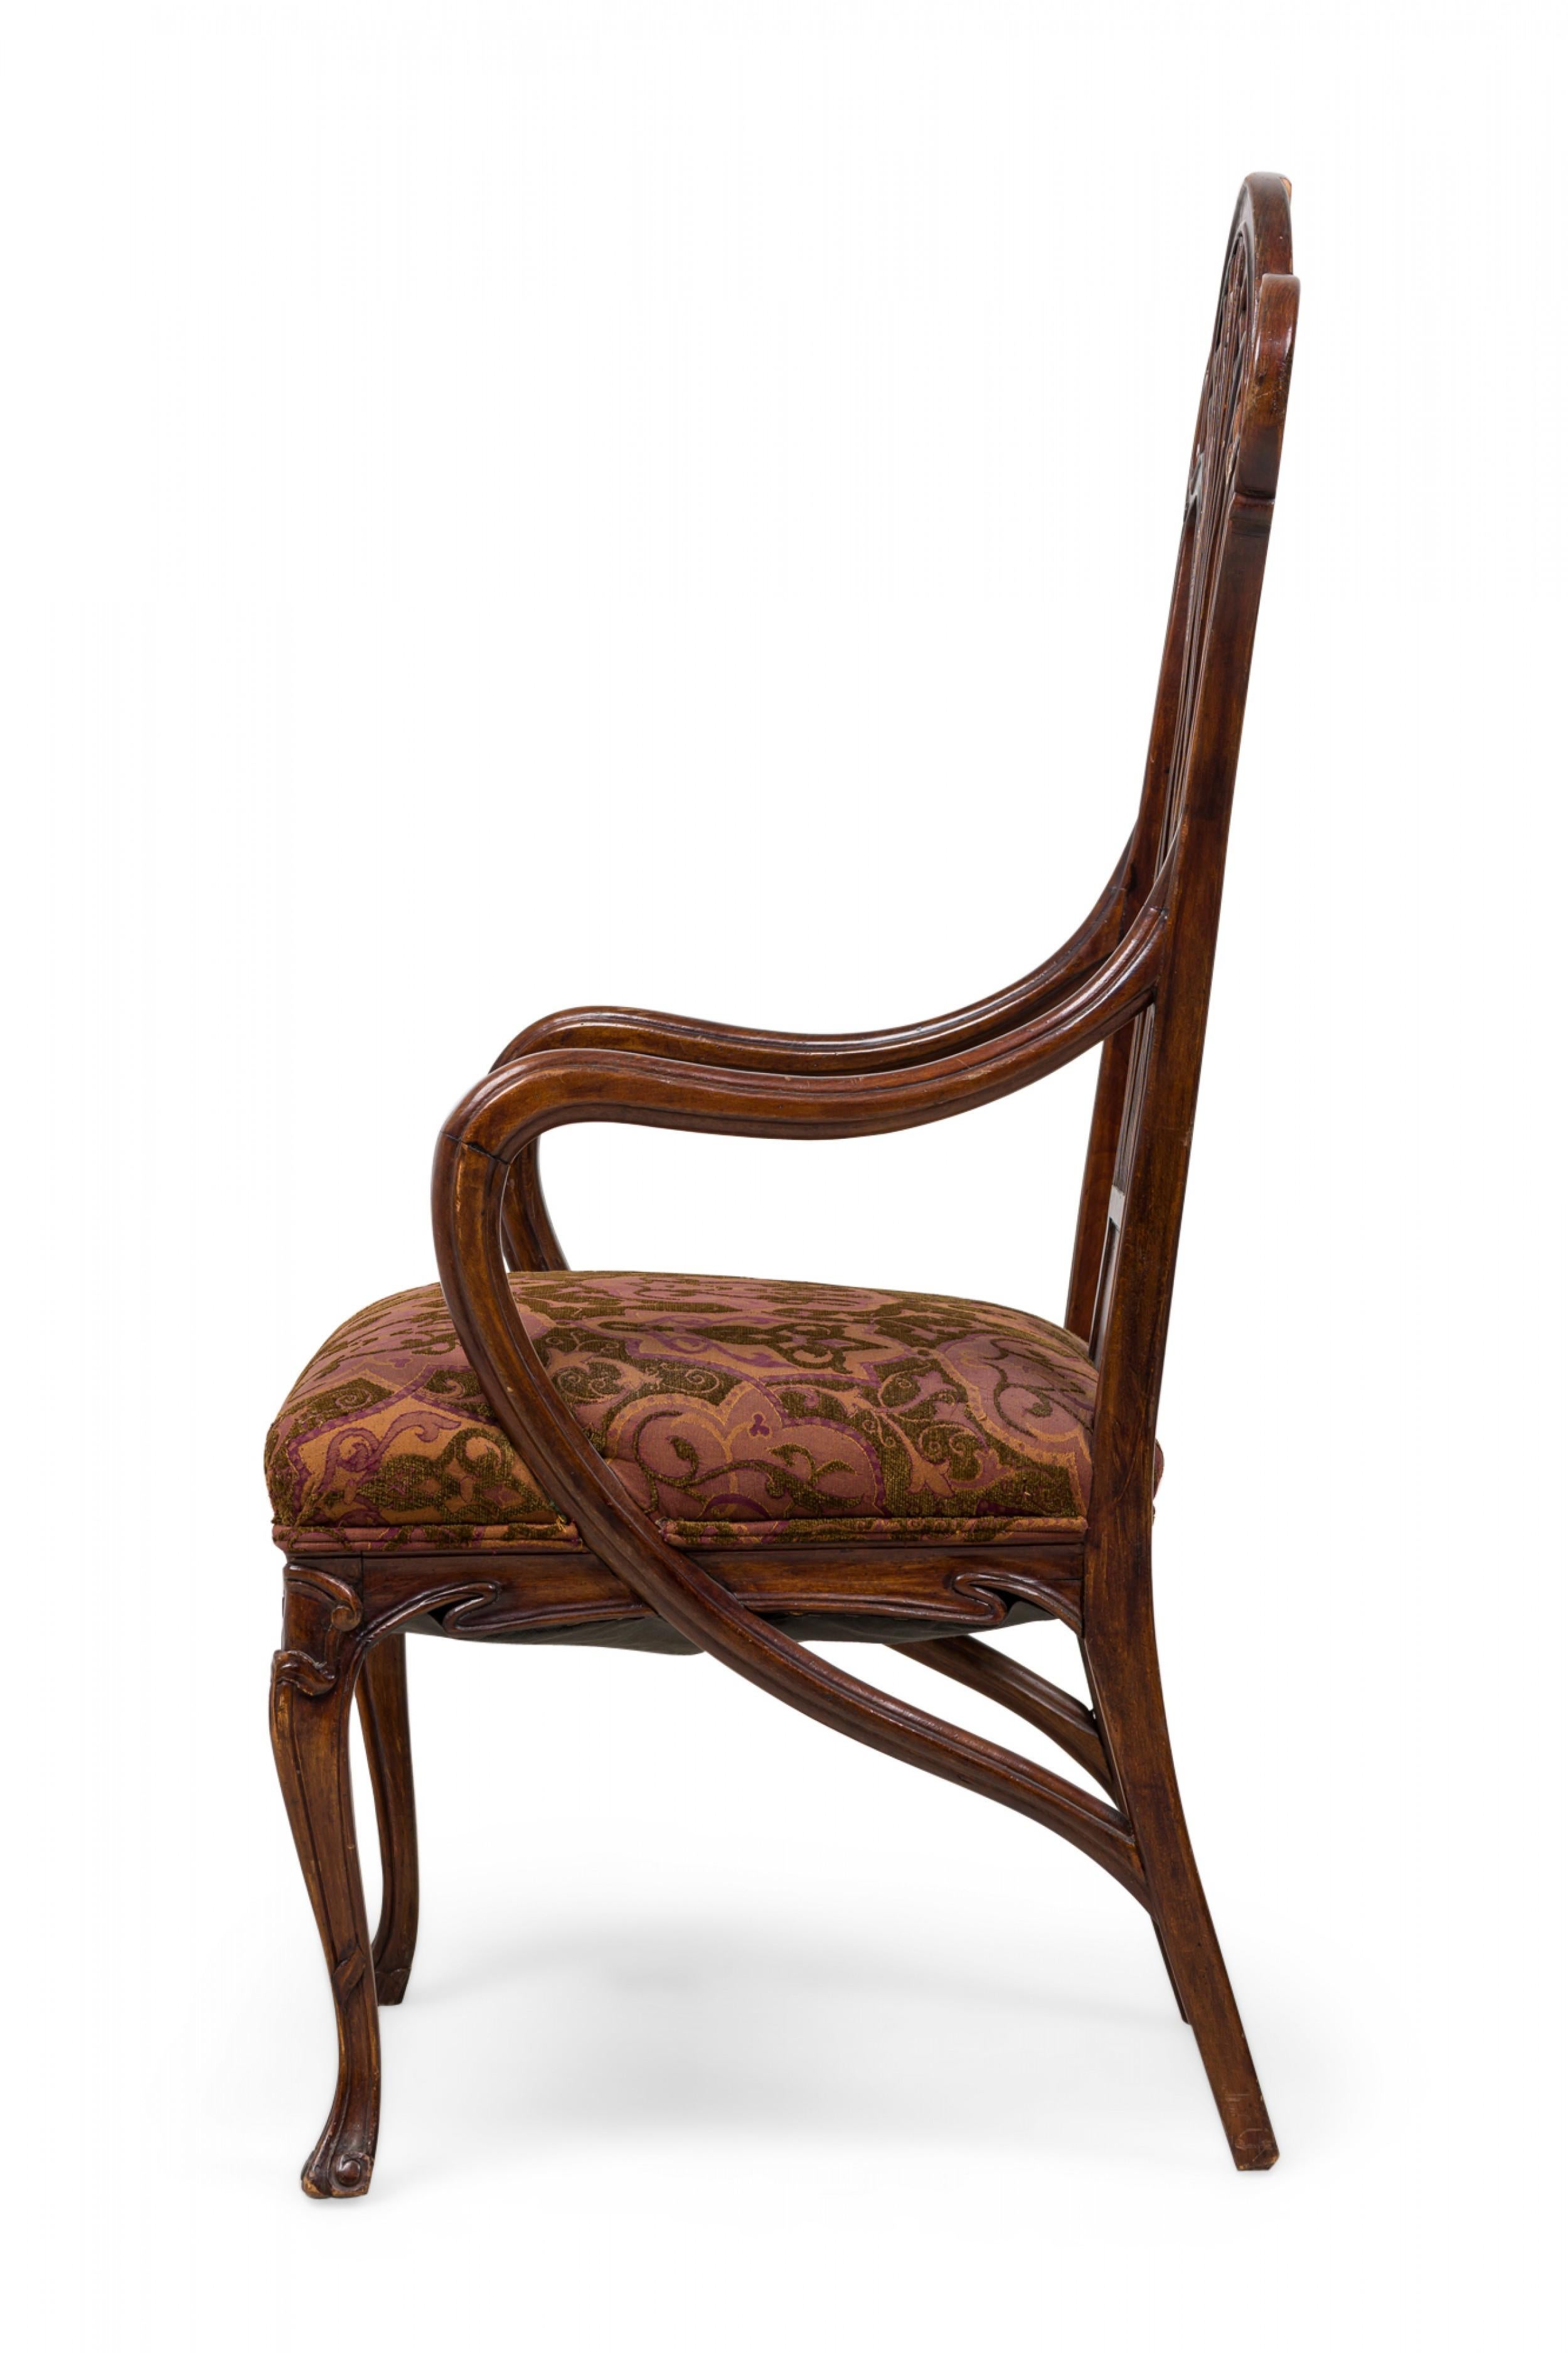 20th Century Eugene Gaillard Art Nouveau French Mahogany Upholstered Armchair For Sale